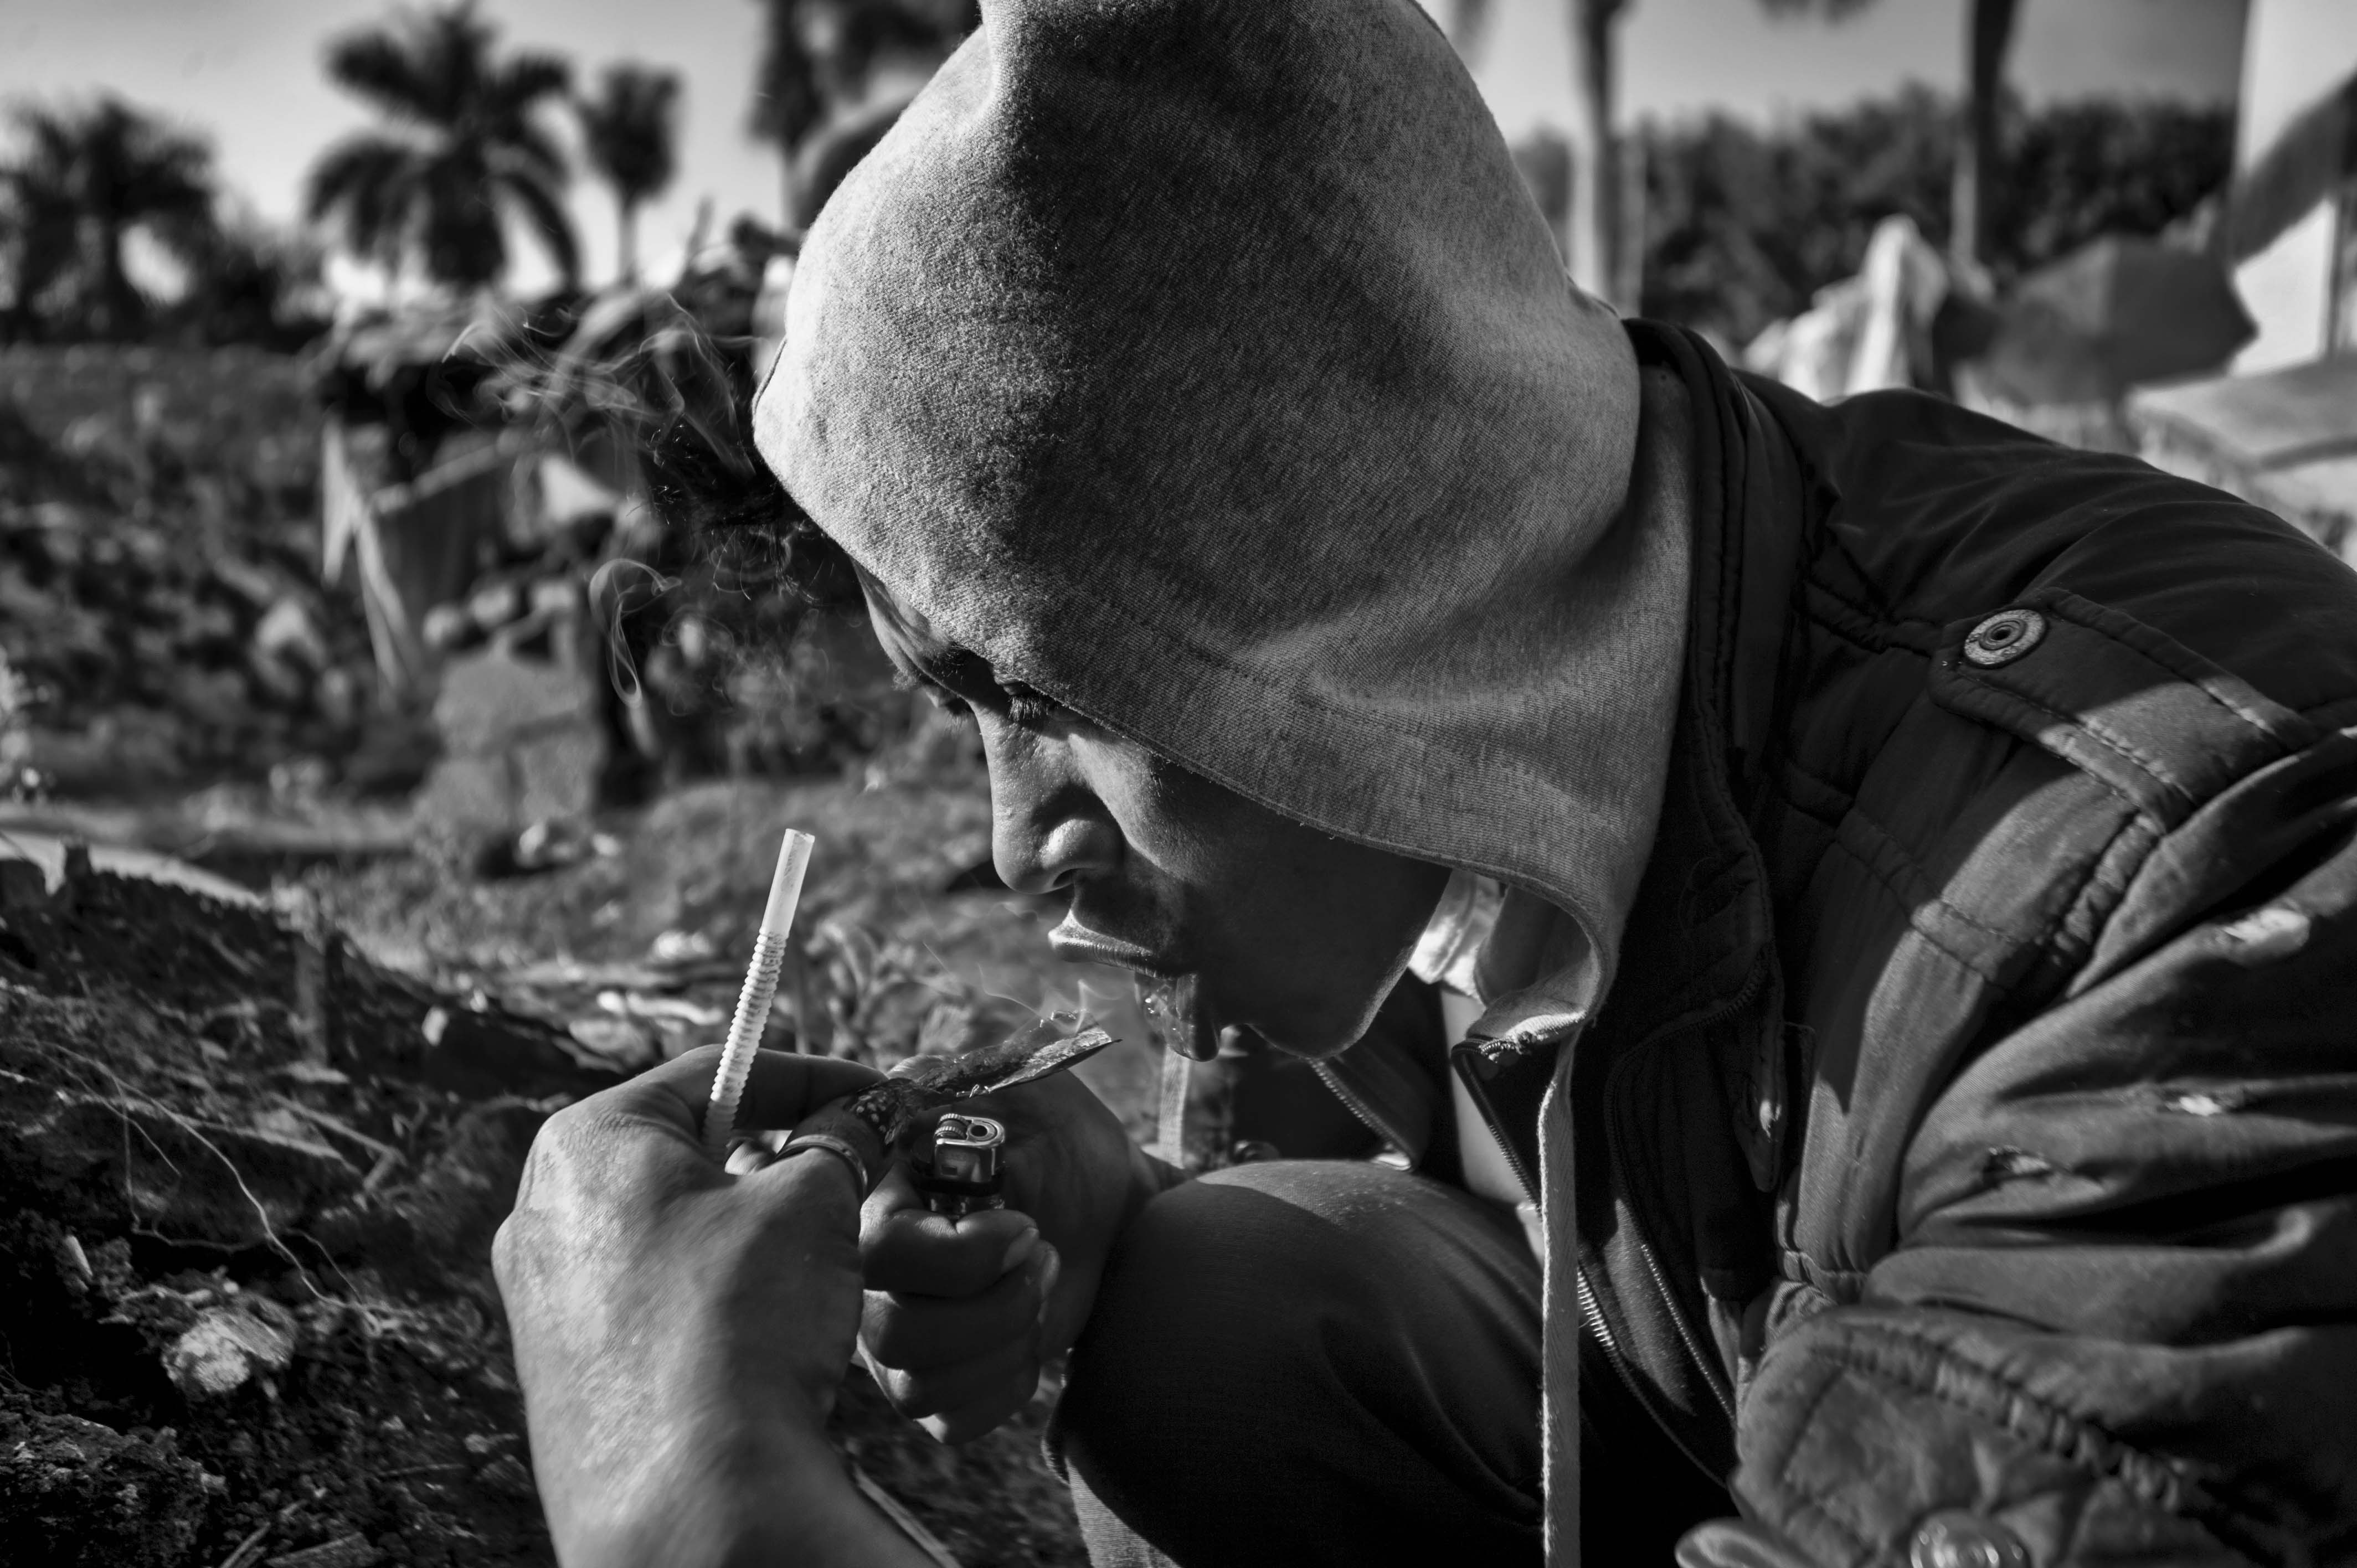 An ethnic Shan man smokes heroin in the Chinese border town Ruili. The illicit drug market and abundant natural resources in northern Burma is partly responsible for the various ongoing conflicts.